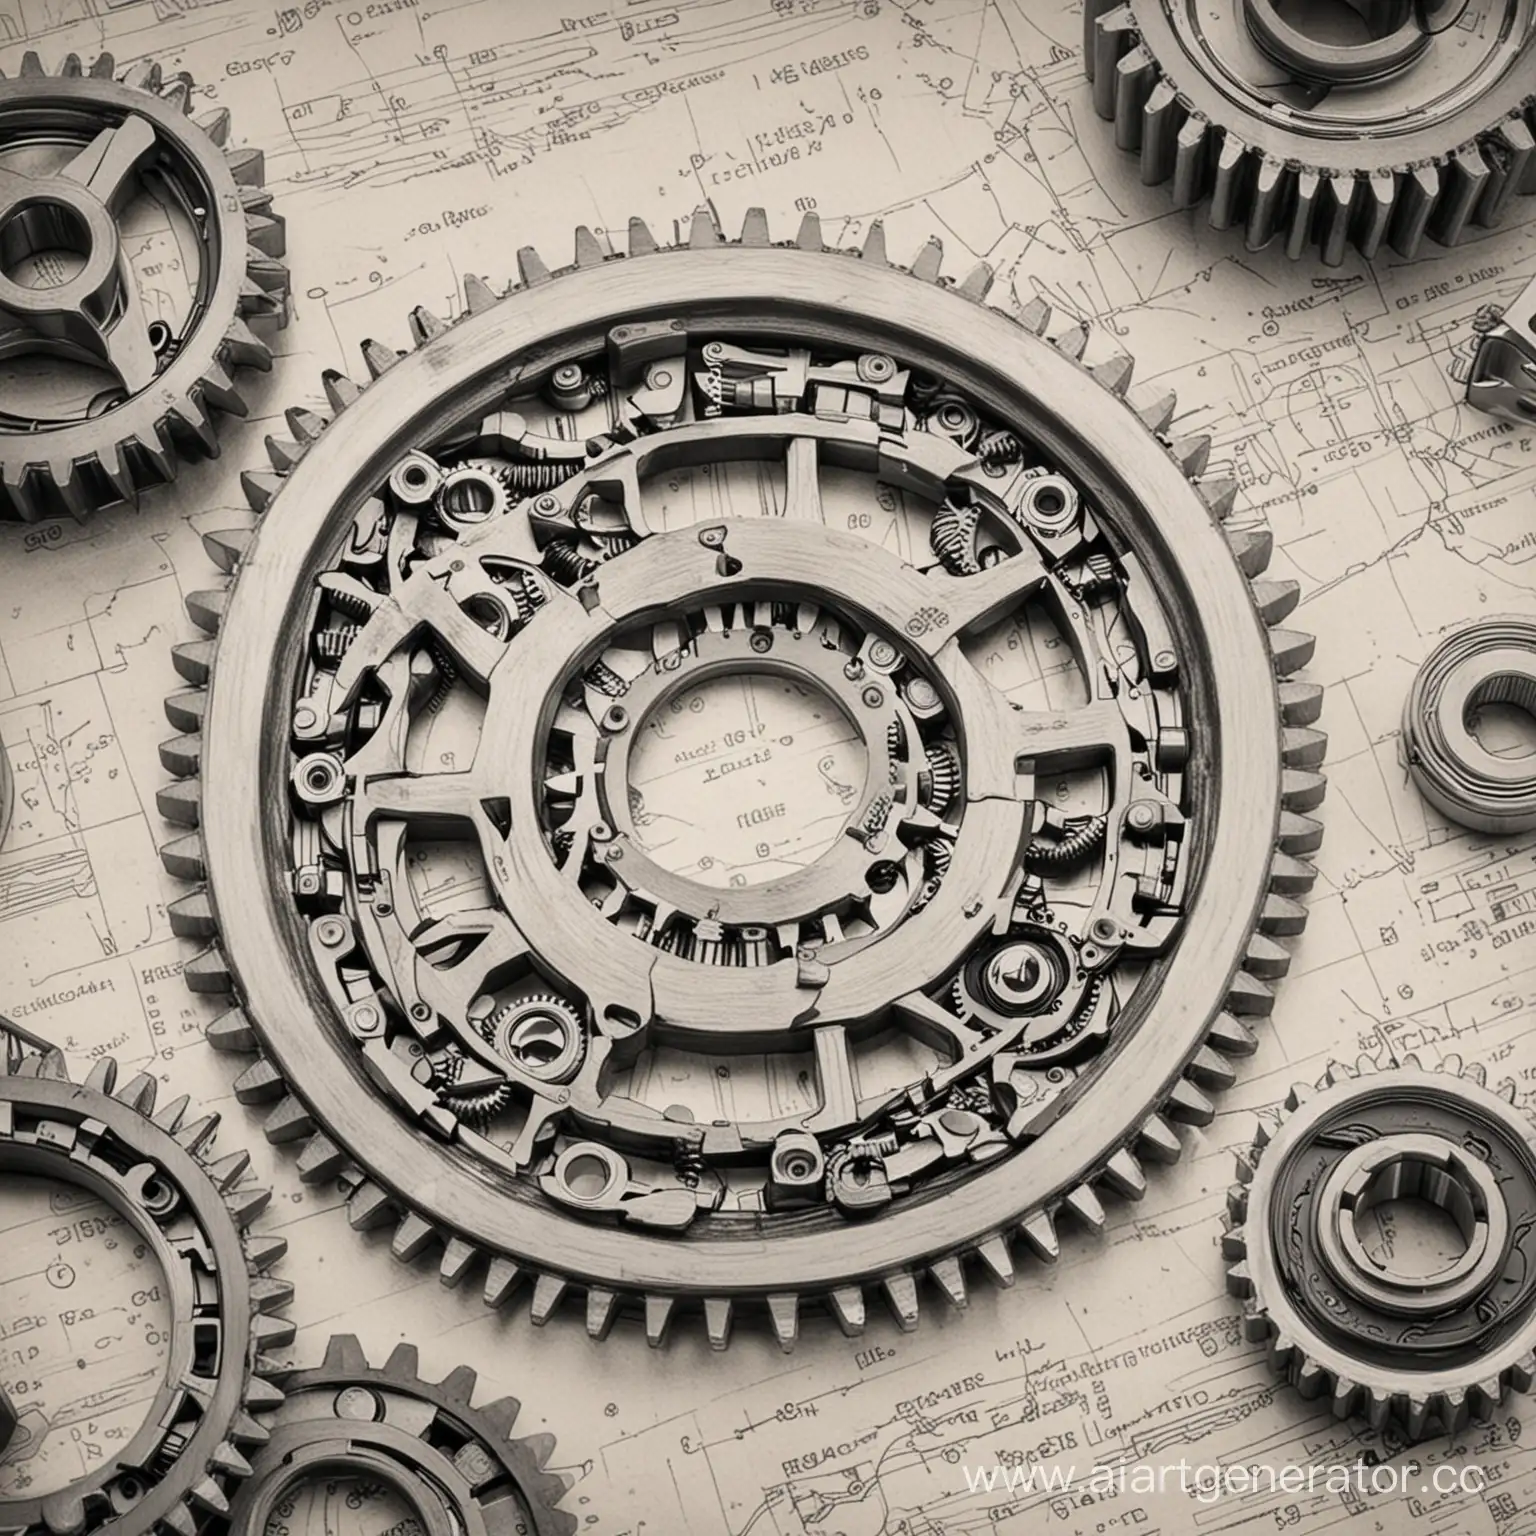 Mechanical-Bearings-and-Gears-with-Drawings-and-Rotors-Industrial-Company-Logo-Design